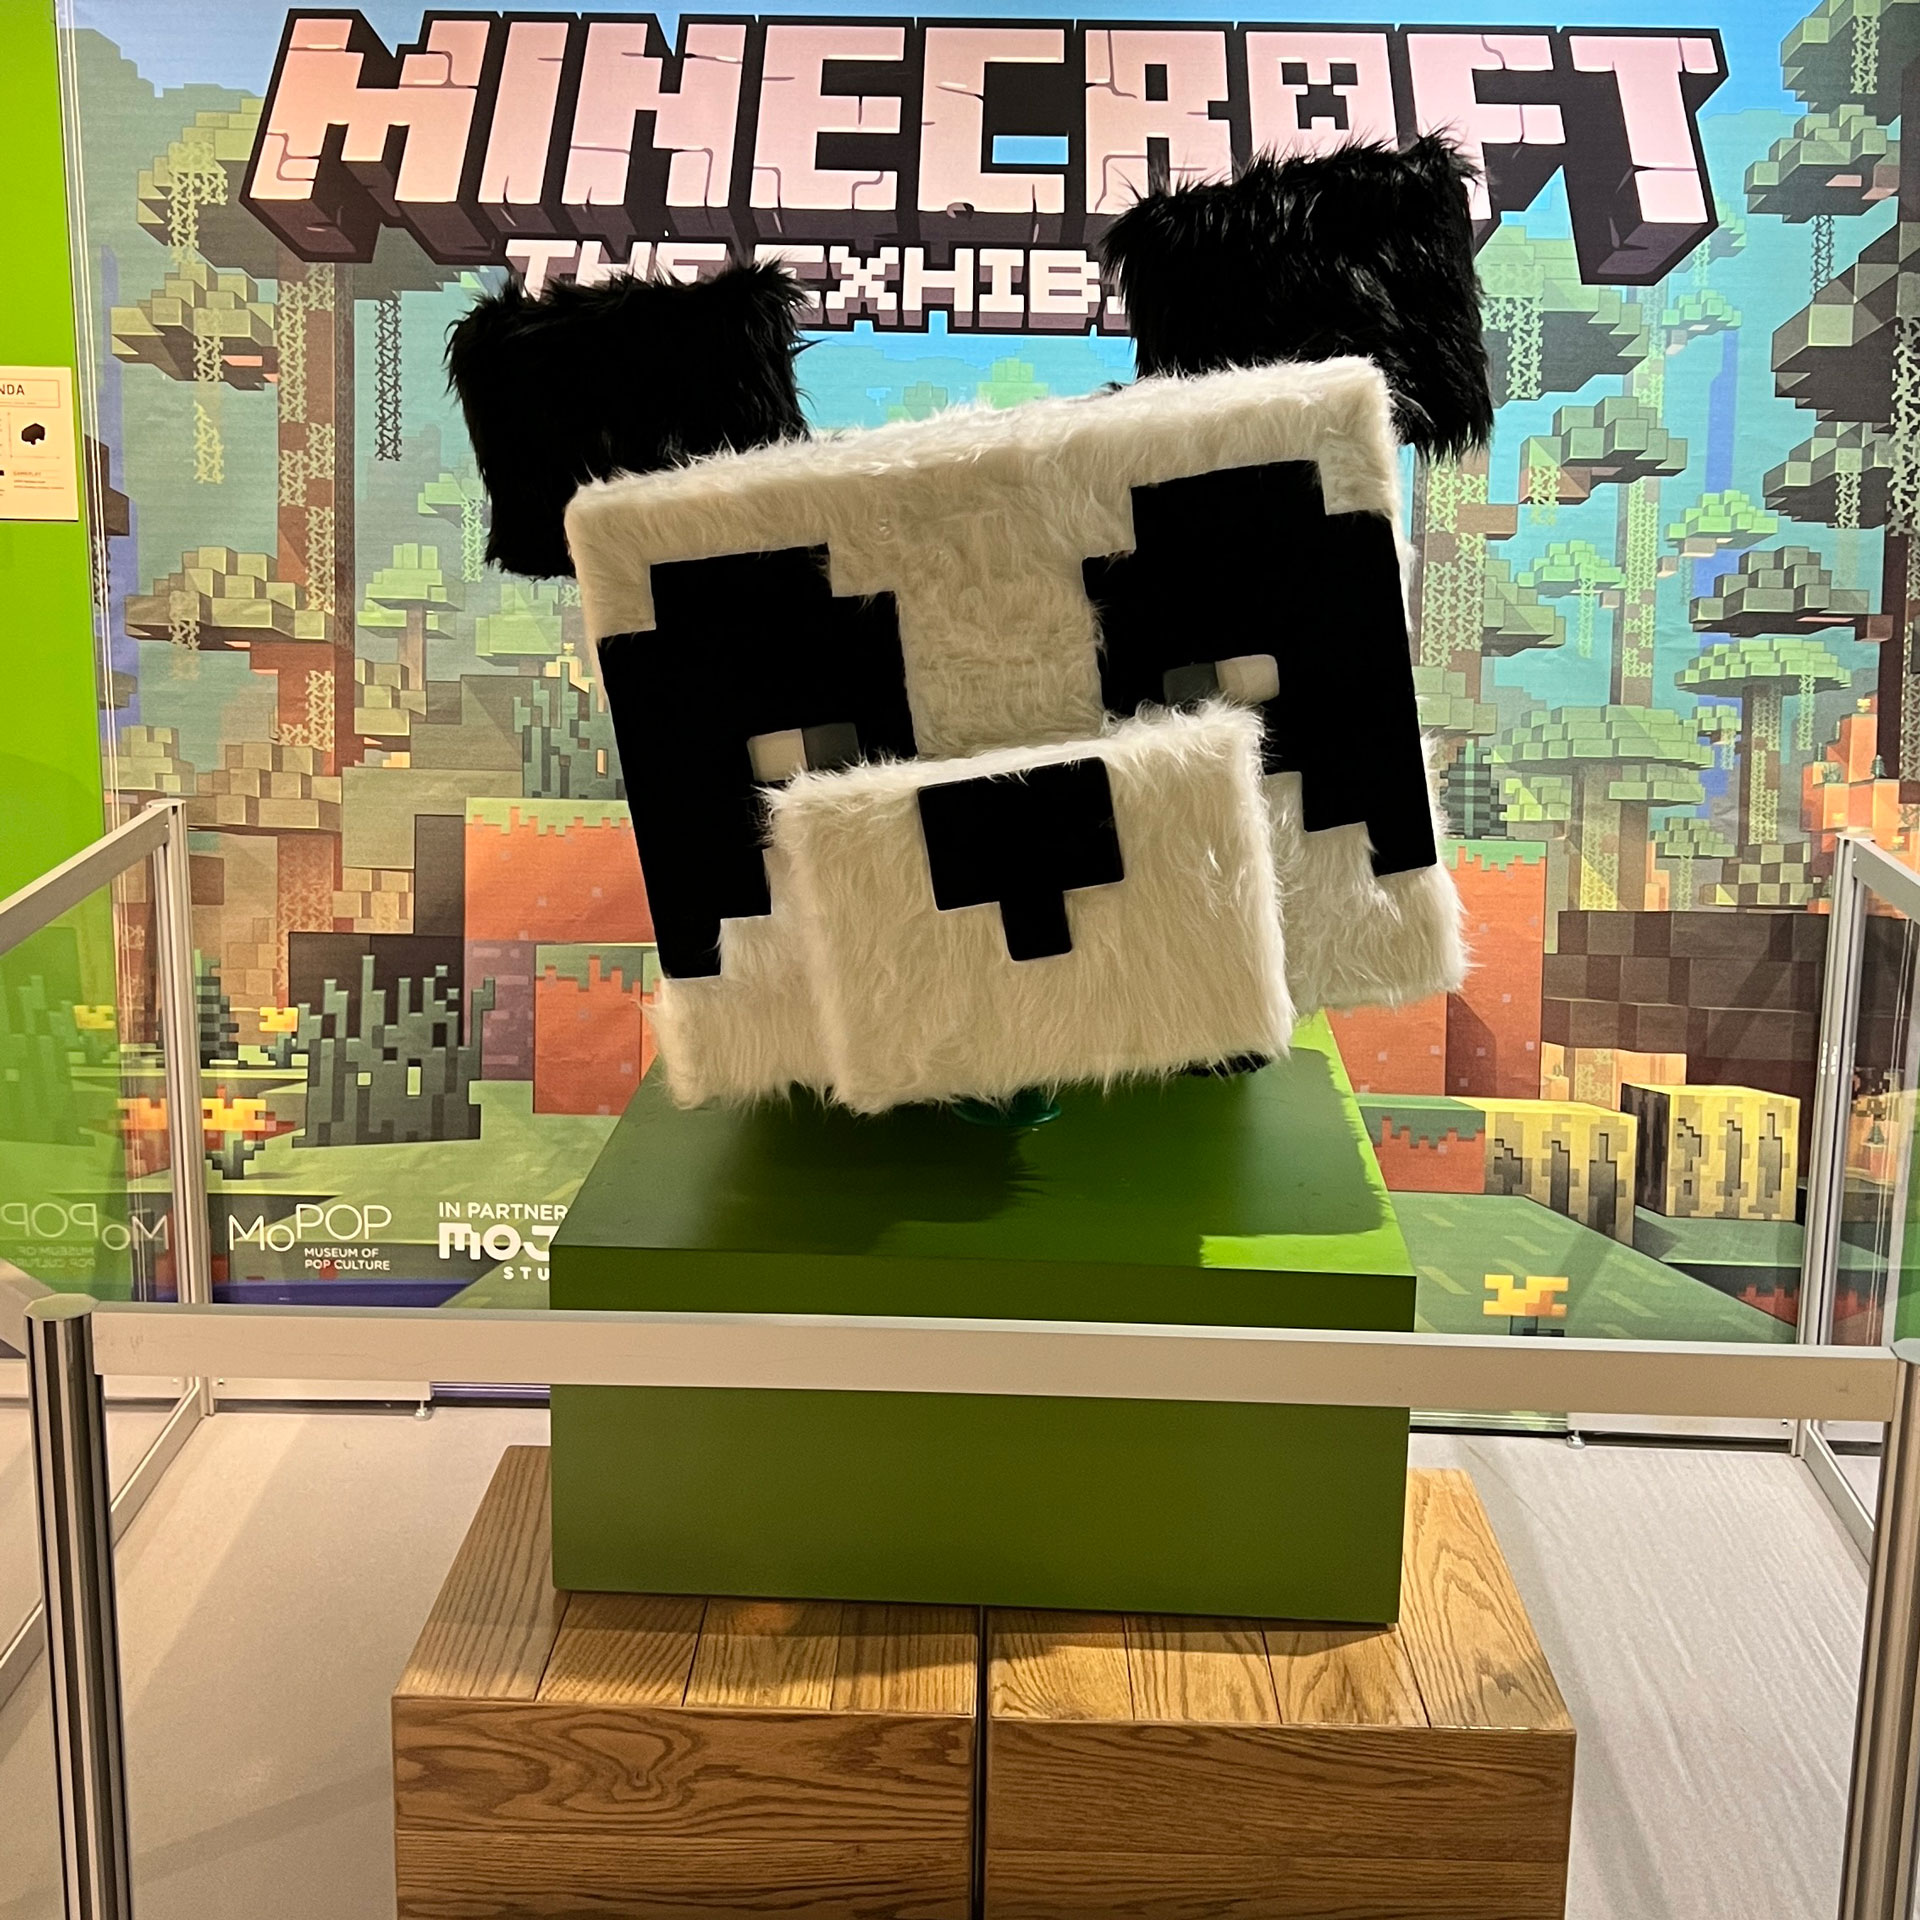 Life-sized Panda mob sculpture in front of a display of Minecraft merchandise in the Pixel8 Pop-Up Shop inside The Children's Museum Store.